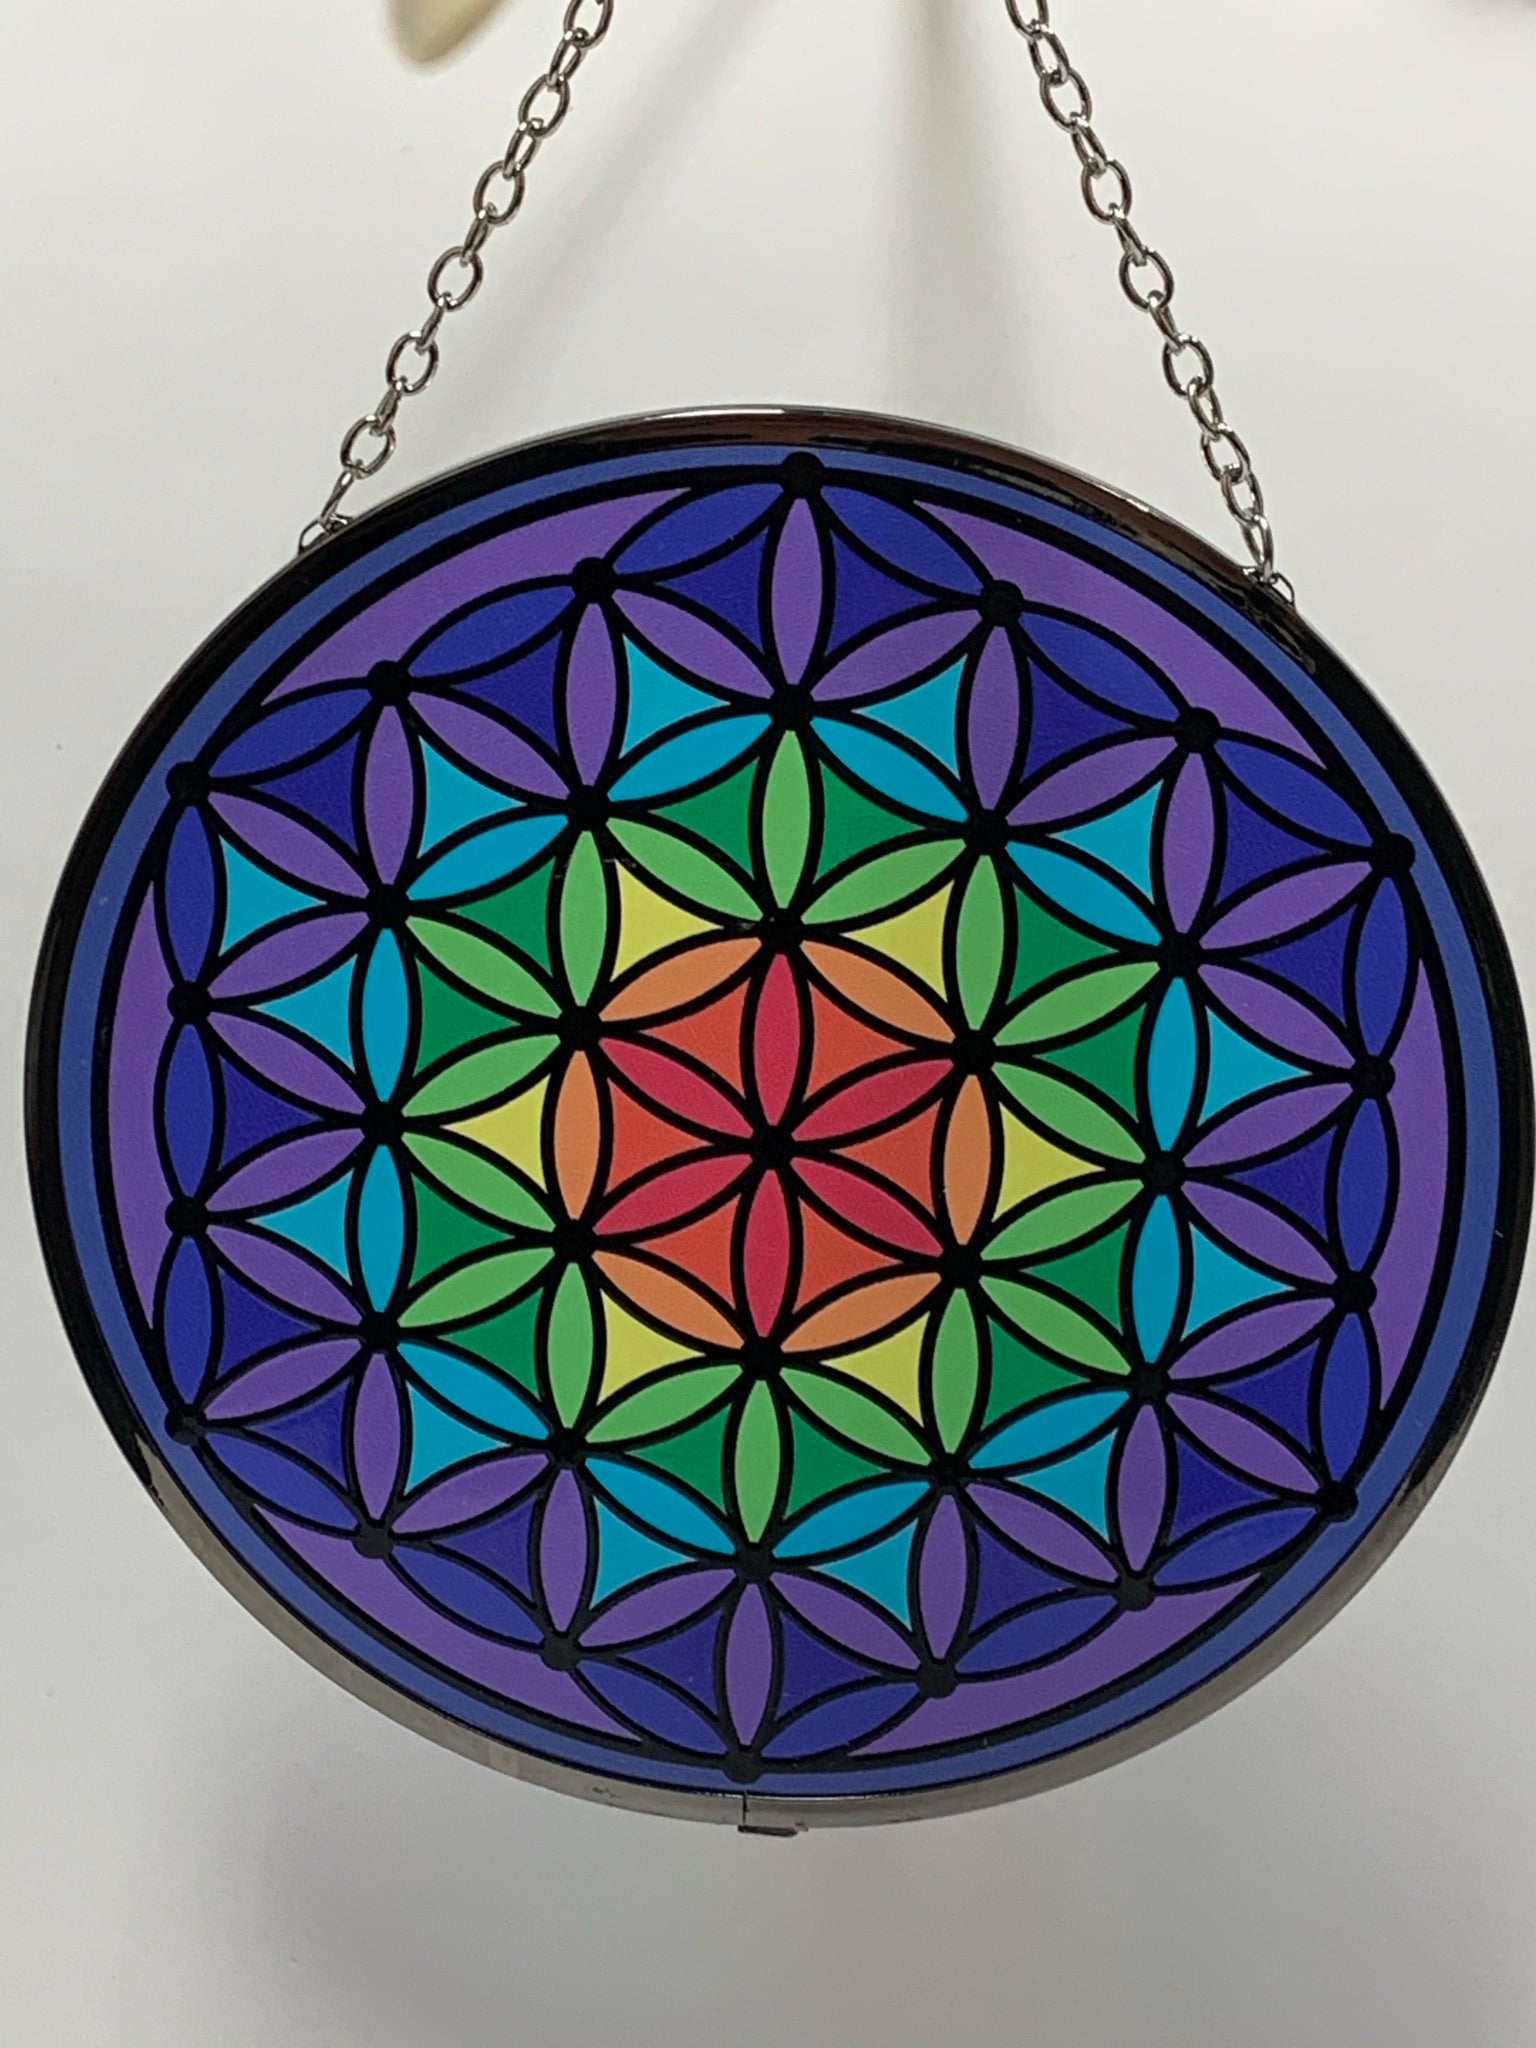 Close-up view. Round, glass flower of life suncatcher in the colors of the rainbow moving from the center (red) to the edge (purple). The already vibrant color is enhanced when the sun's rays stream through it. Beauty and spiritual meaning - nice combo! Comes with a chain for hanging and a suction cup, with a hook, to hold it.